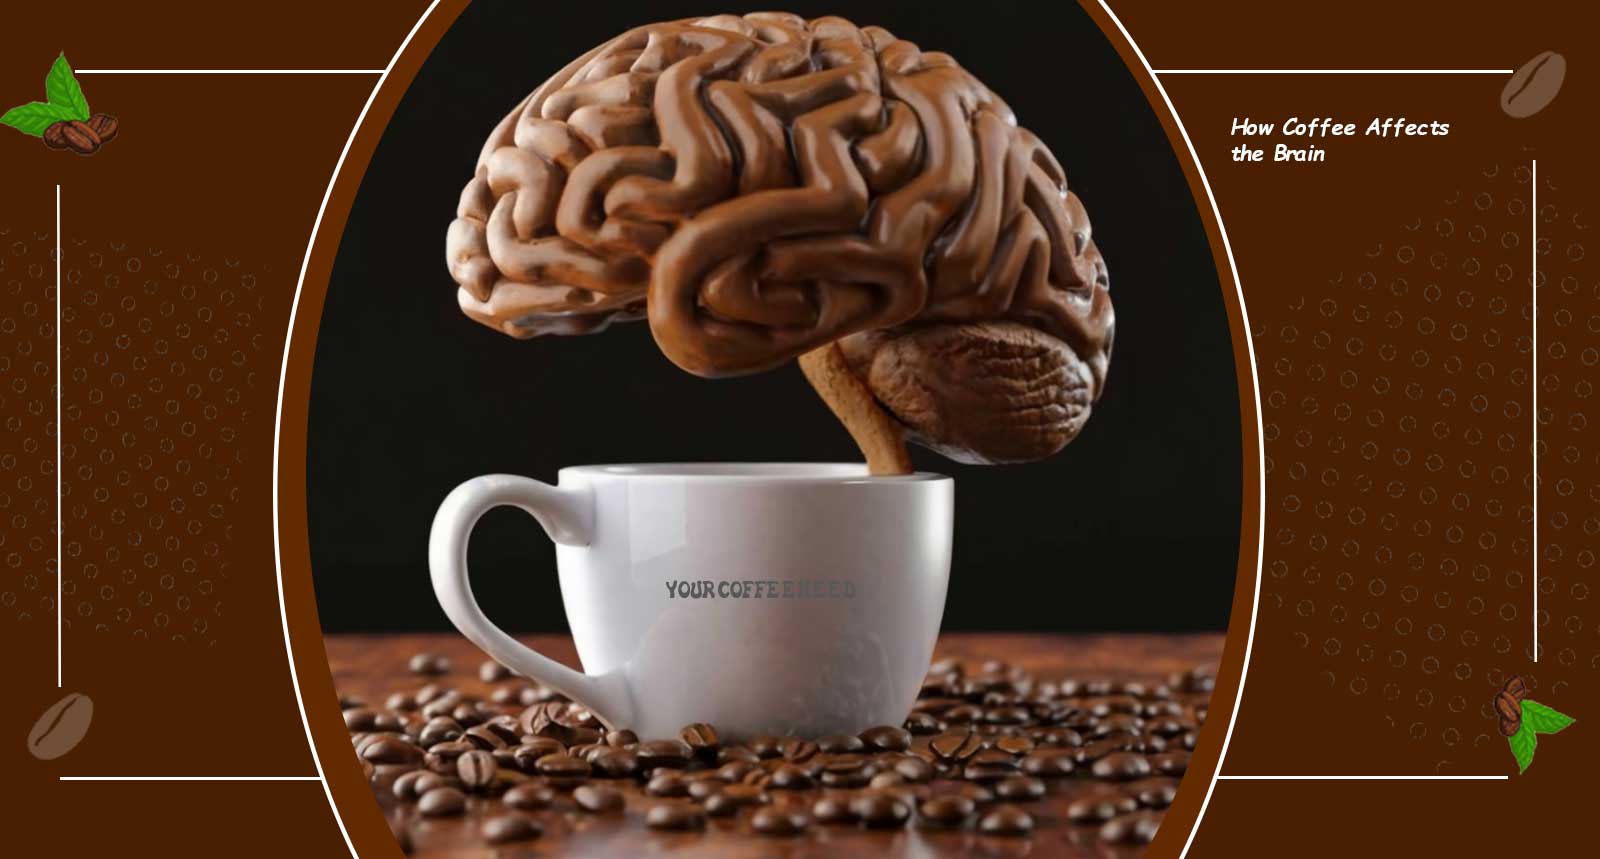 How Coffee Affects the Brain